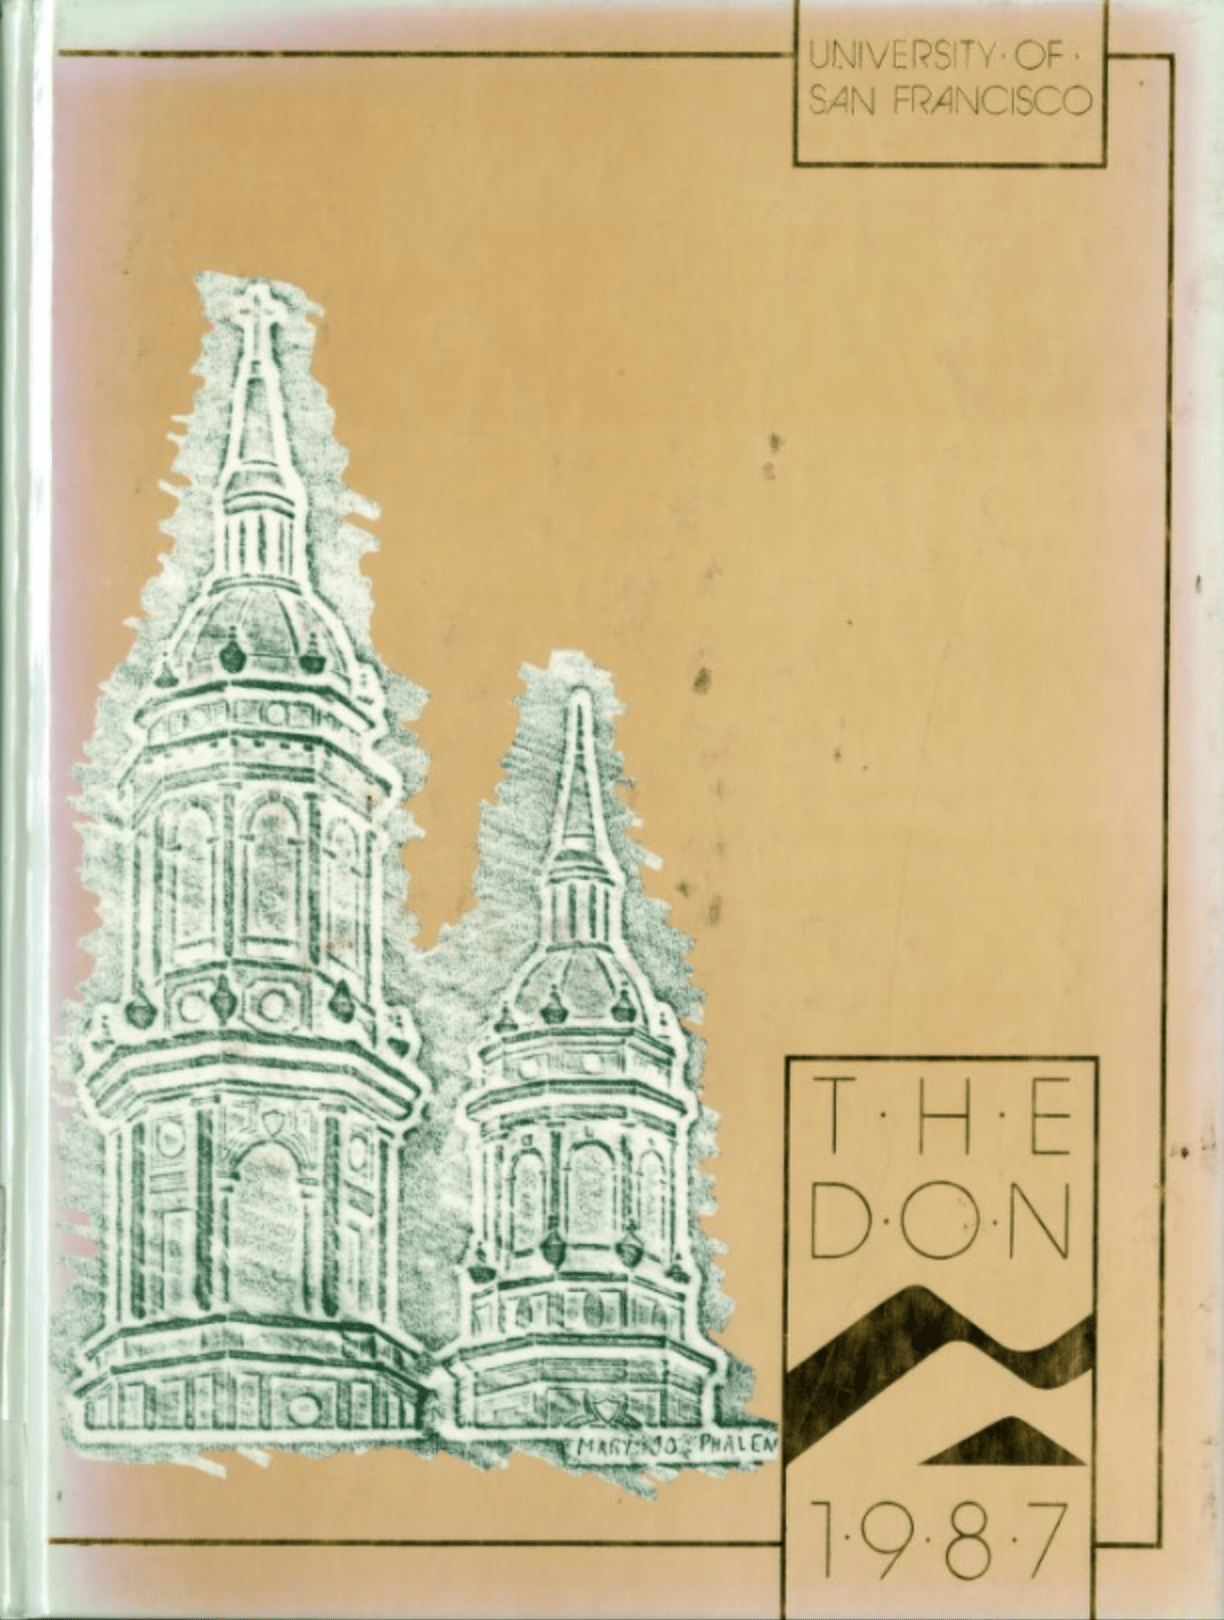 Cover of the 1987 issue of The Don, showing a sketch of Saint Ignatius Church.